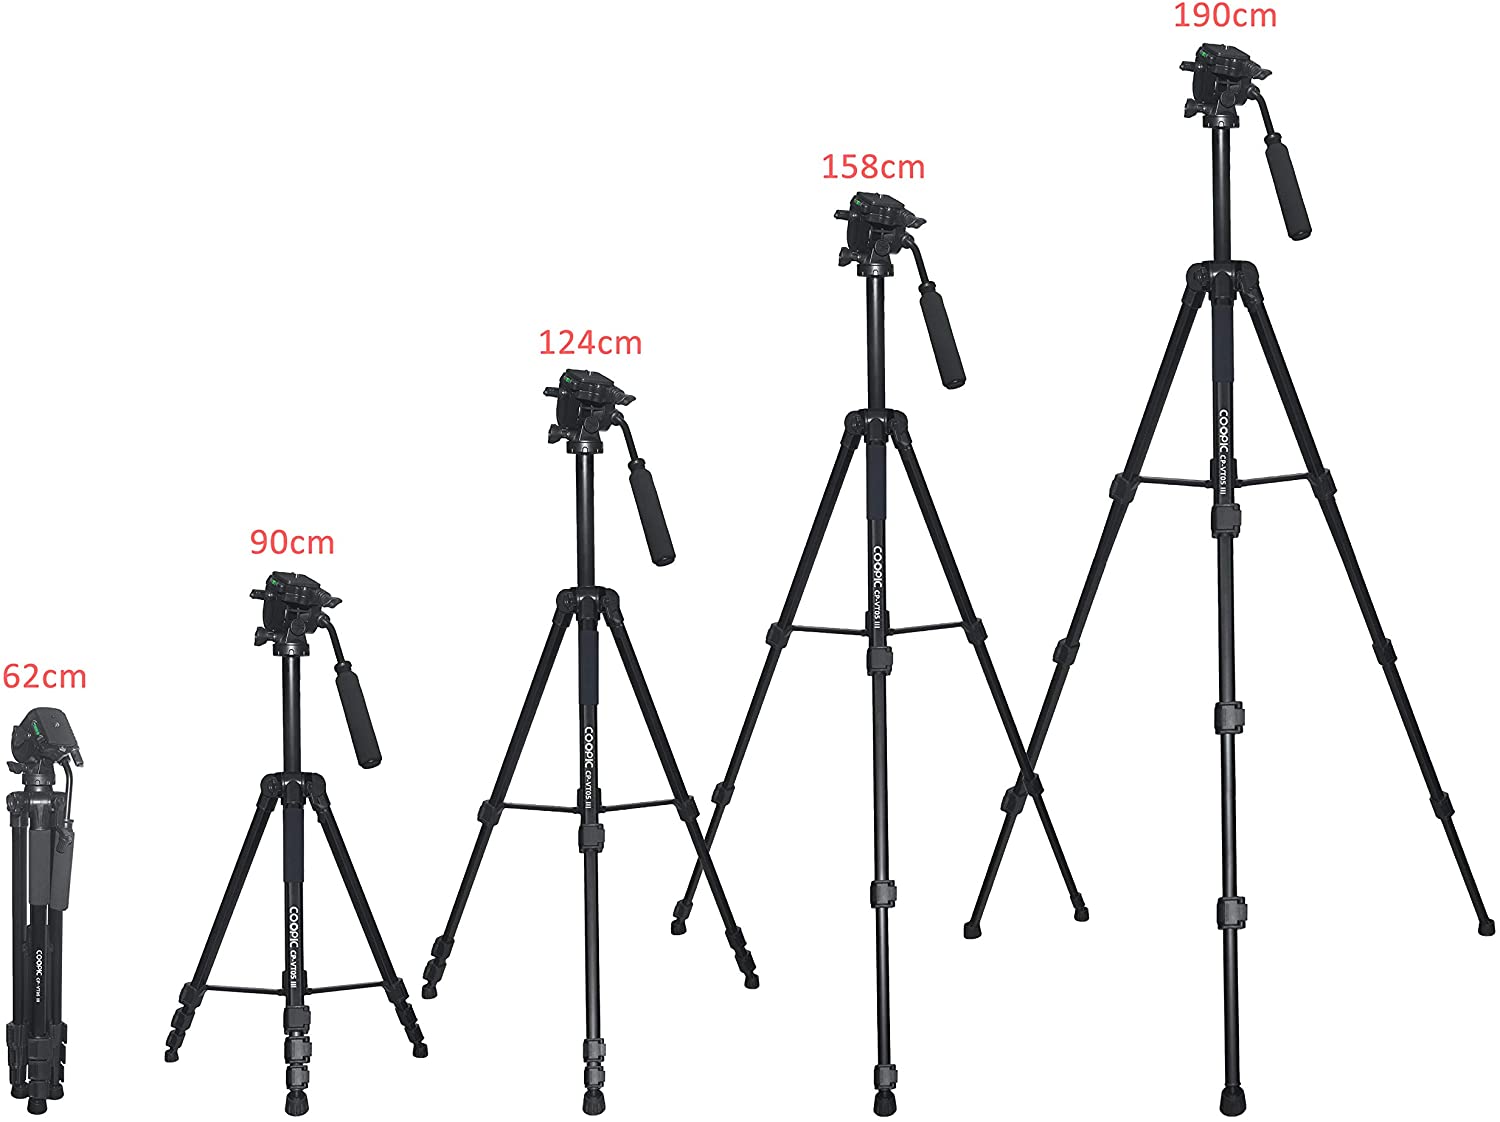 Coopic Cp-Vt05 Iii, Foldable Tripod With Max Height 190Cm/74.80Inch With Horizontal Fluid Pan Head For Camera And Camcorder Photography Load Up To 5Kg.